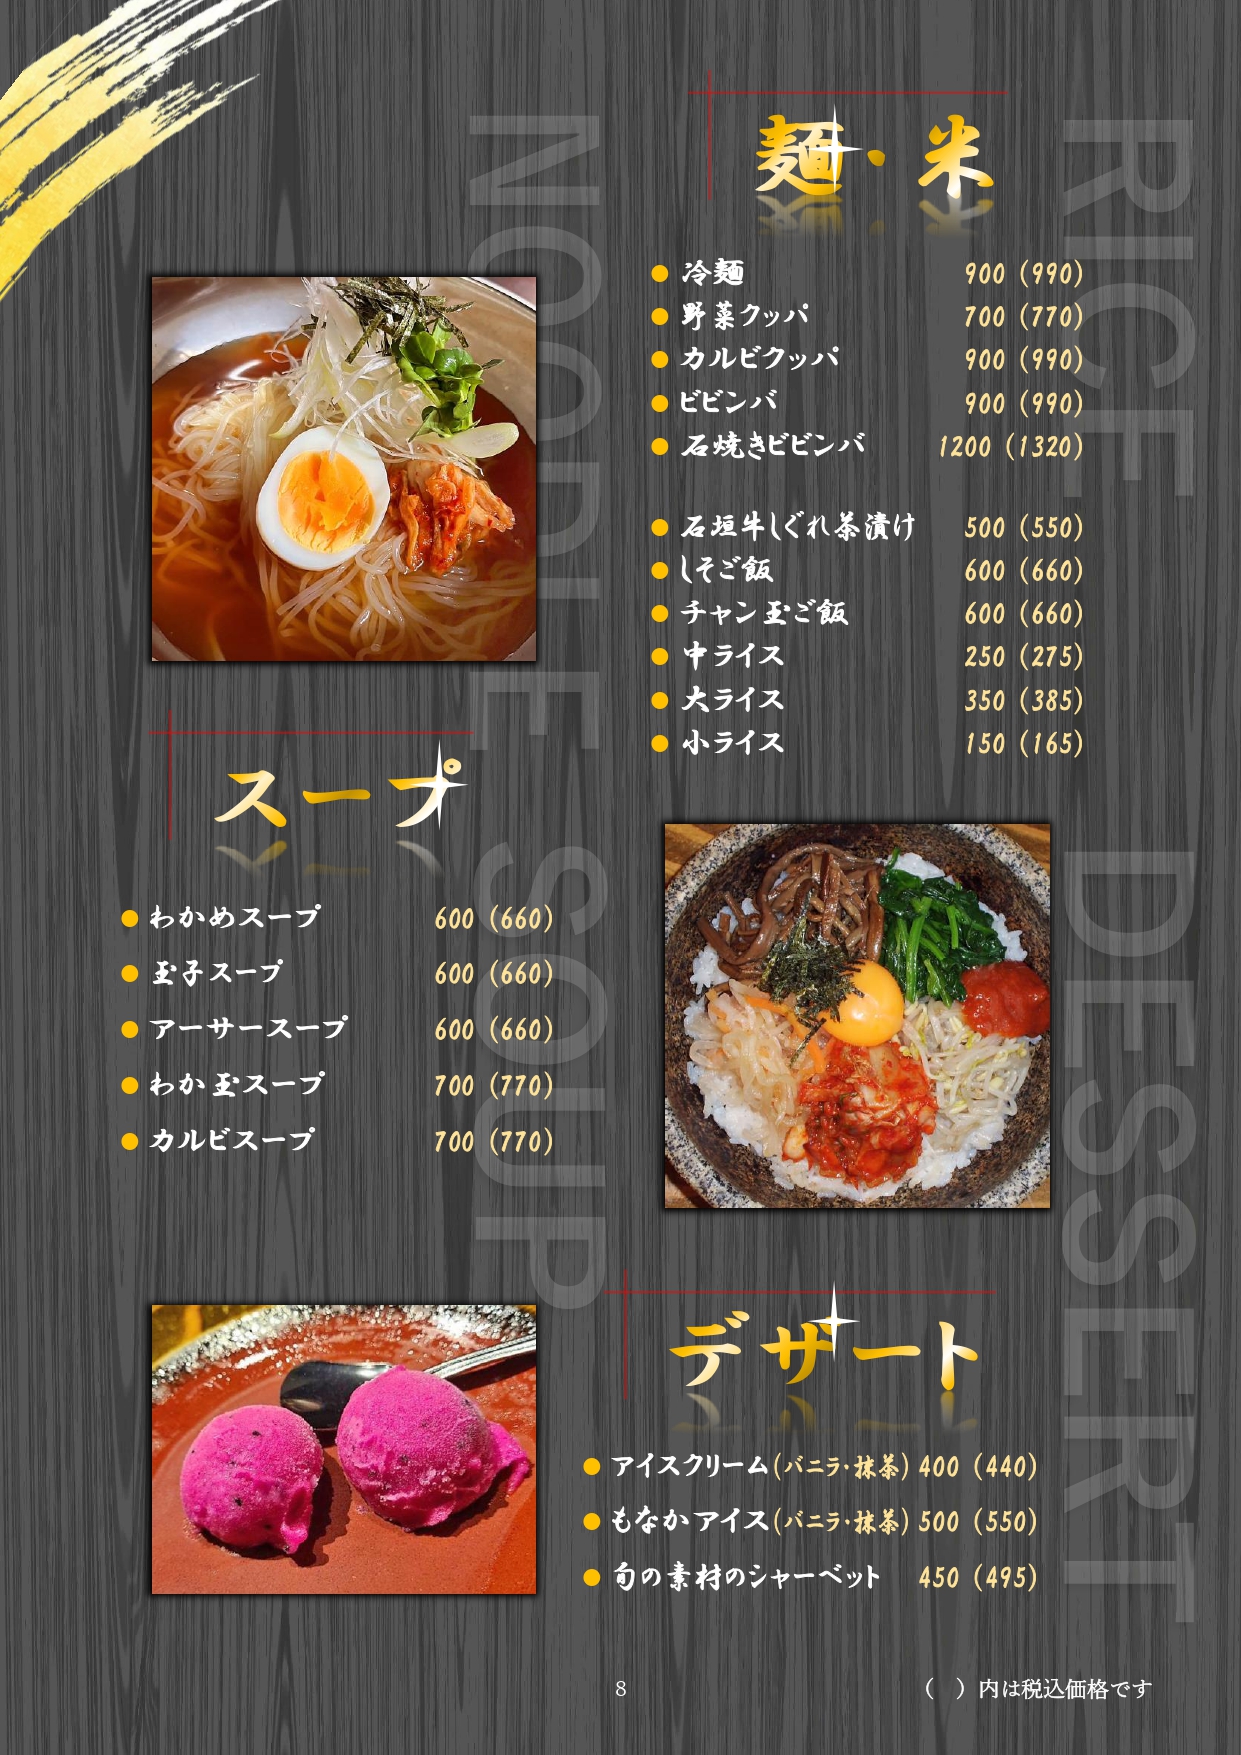 Images 石垣牛焼肉専門店まる本店